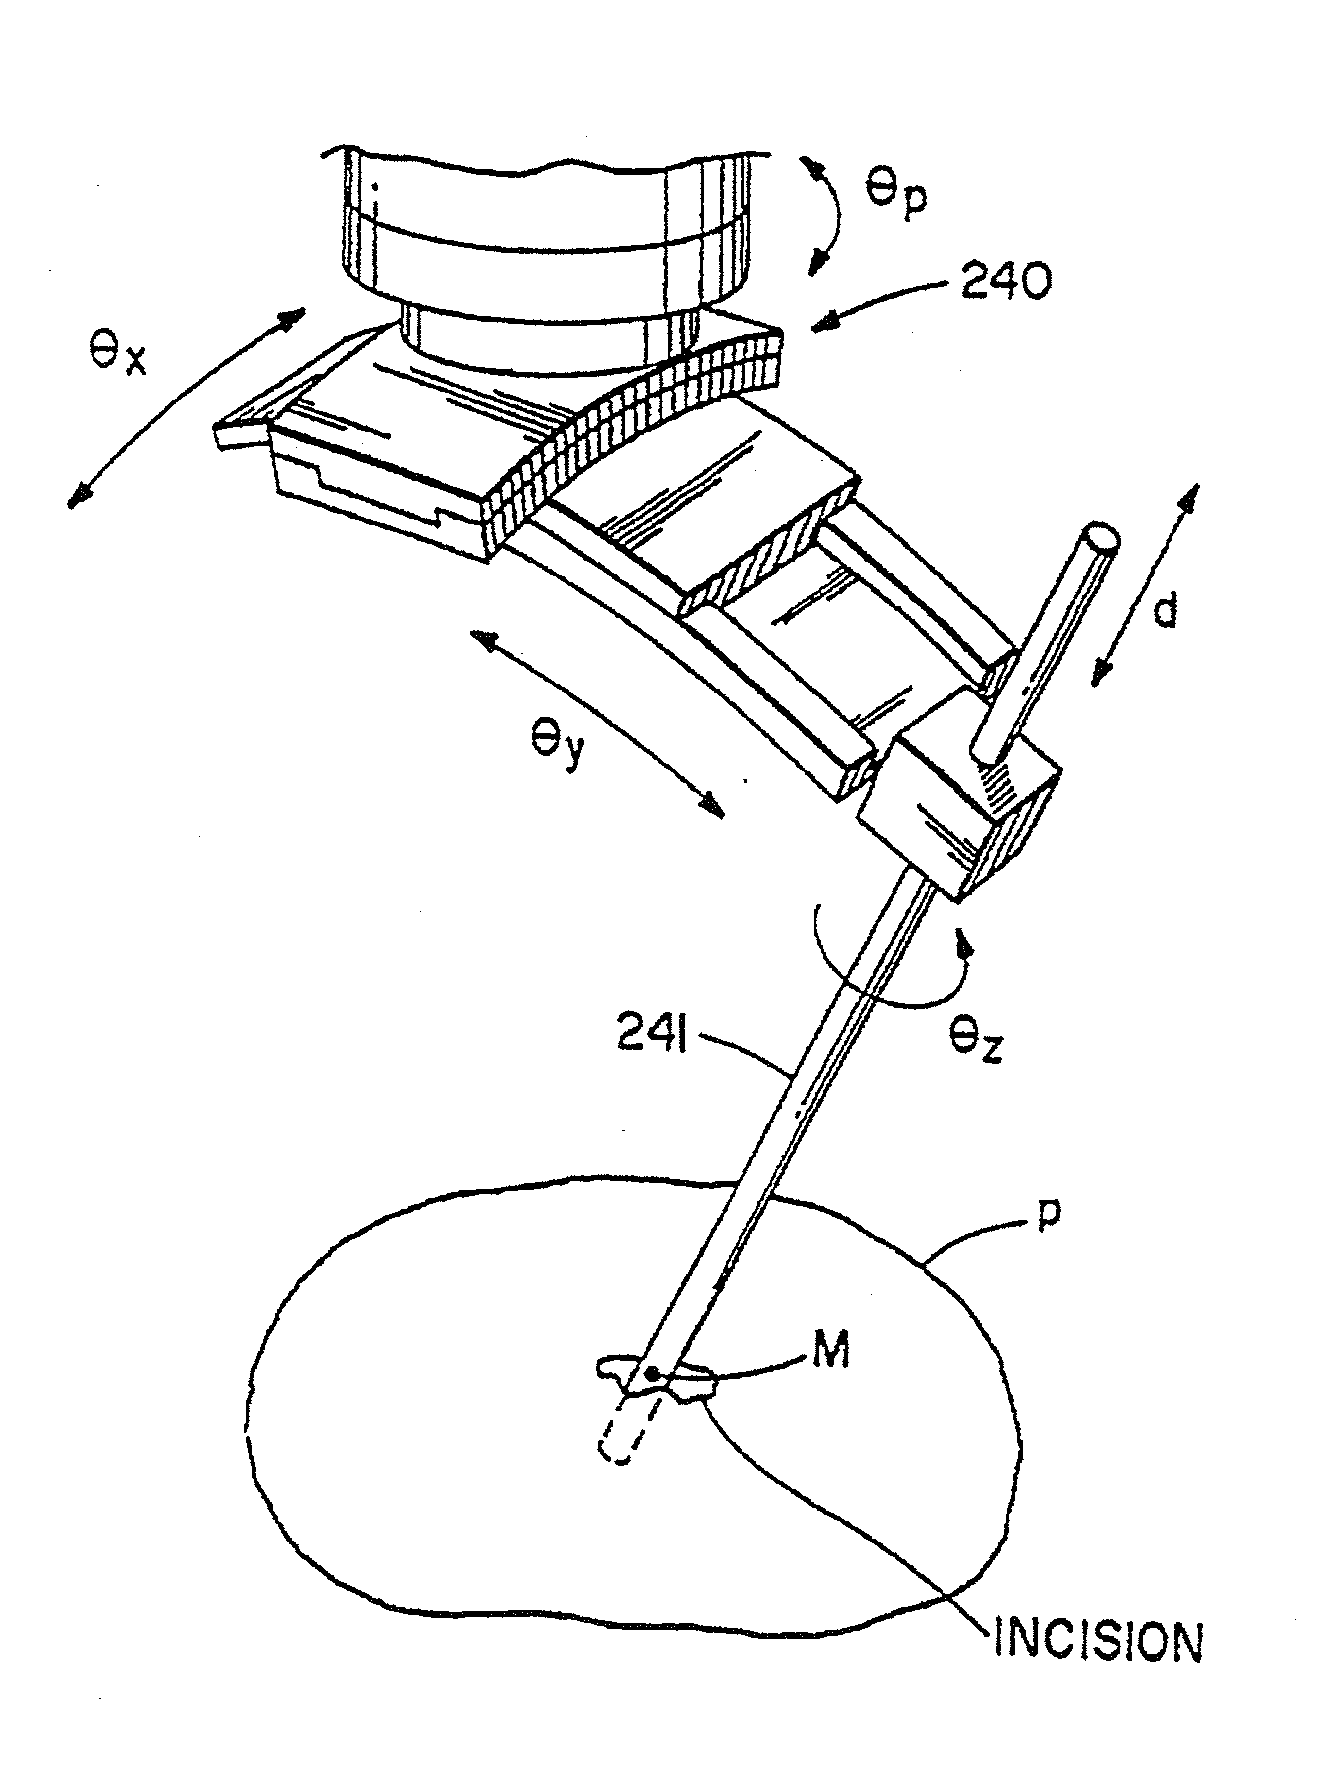 System and method for augmentation of endoscopic surgery